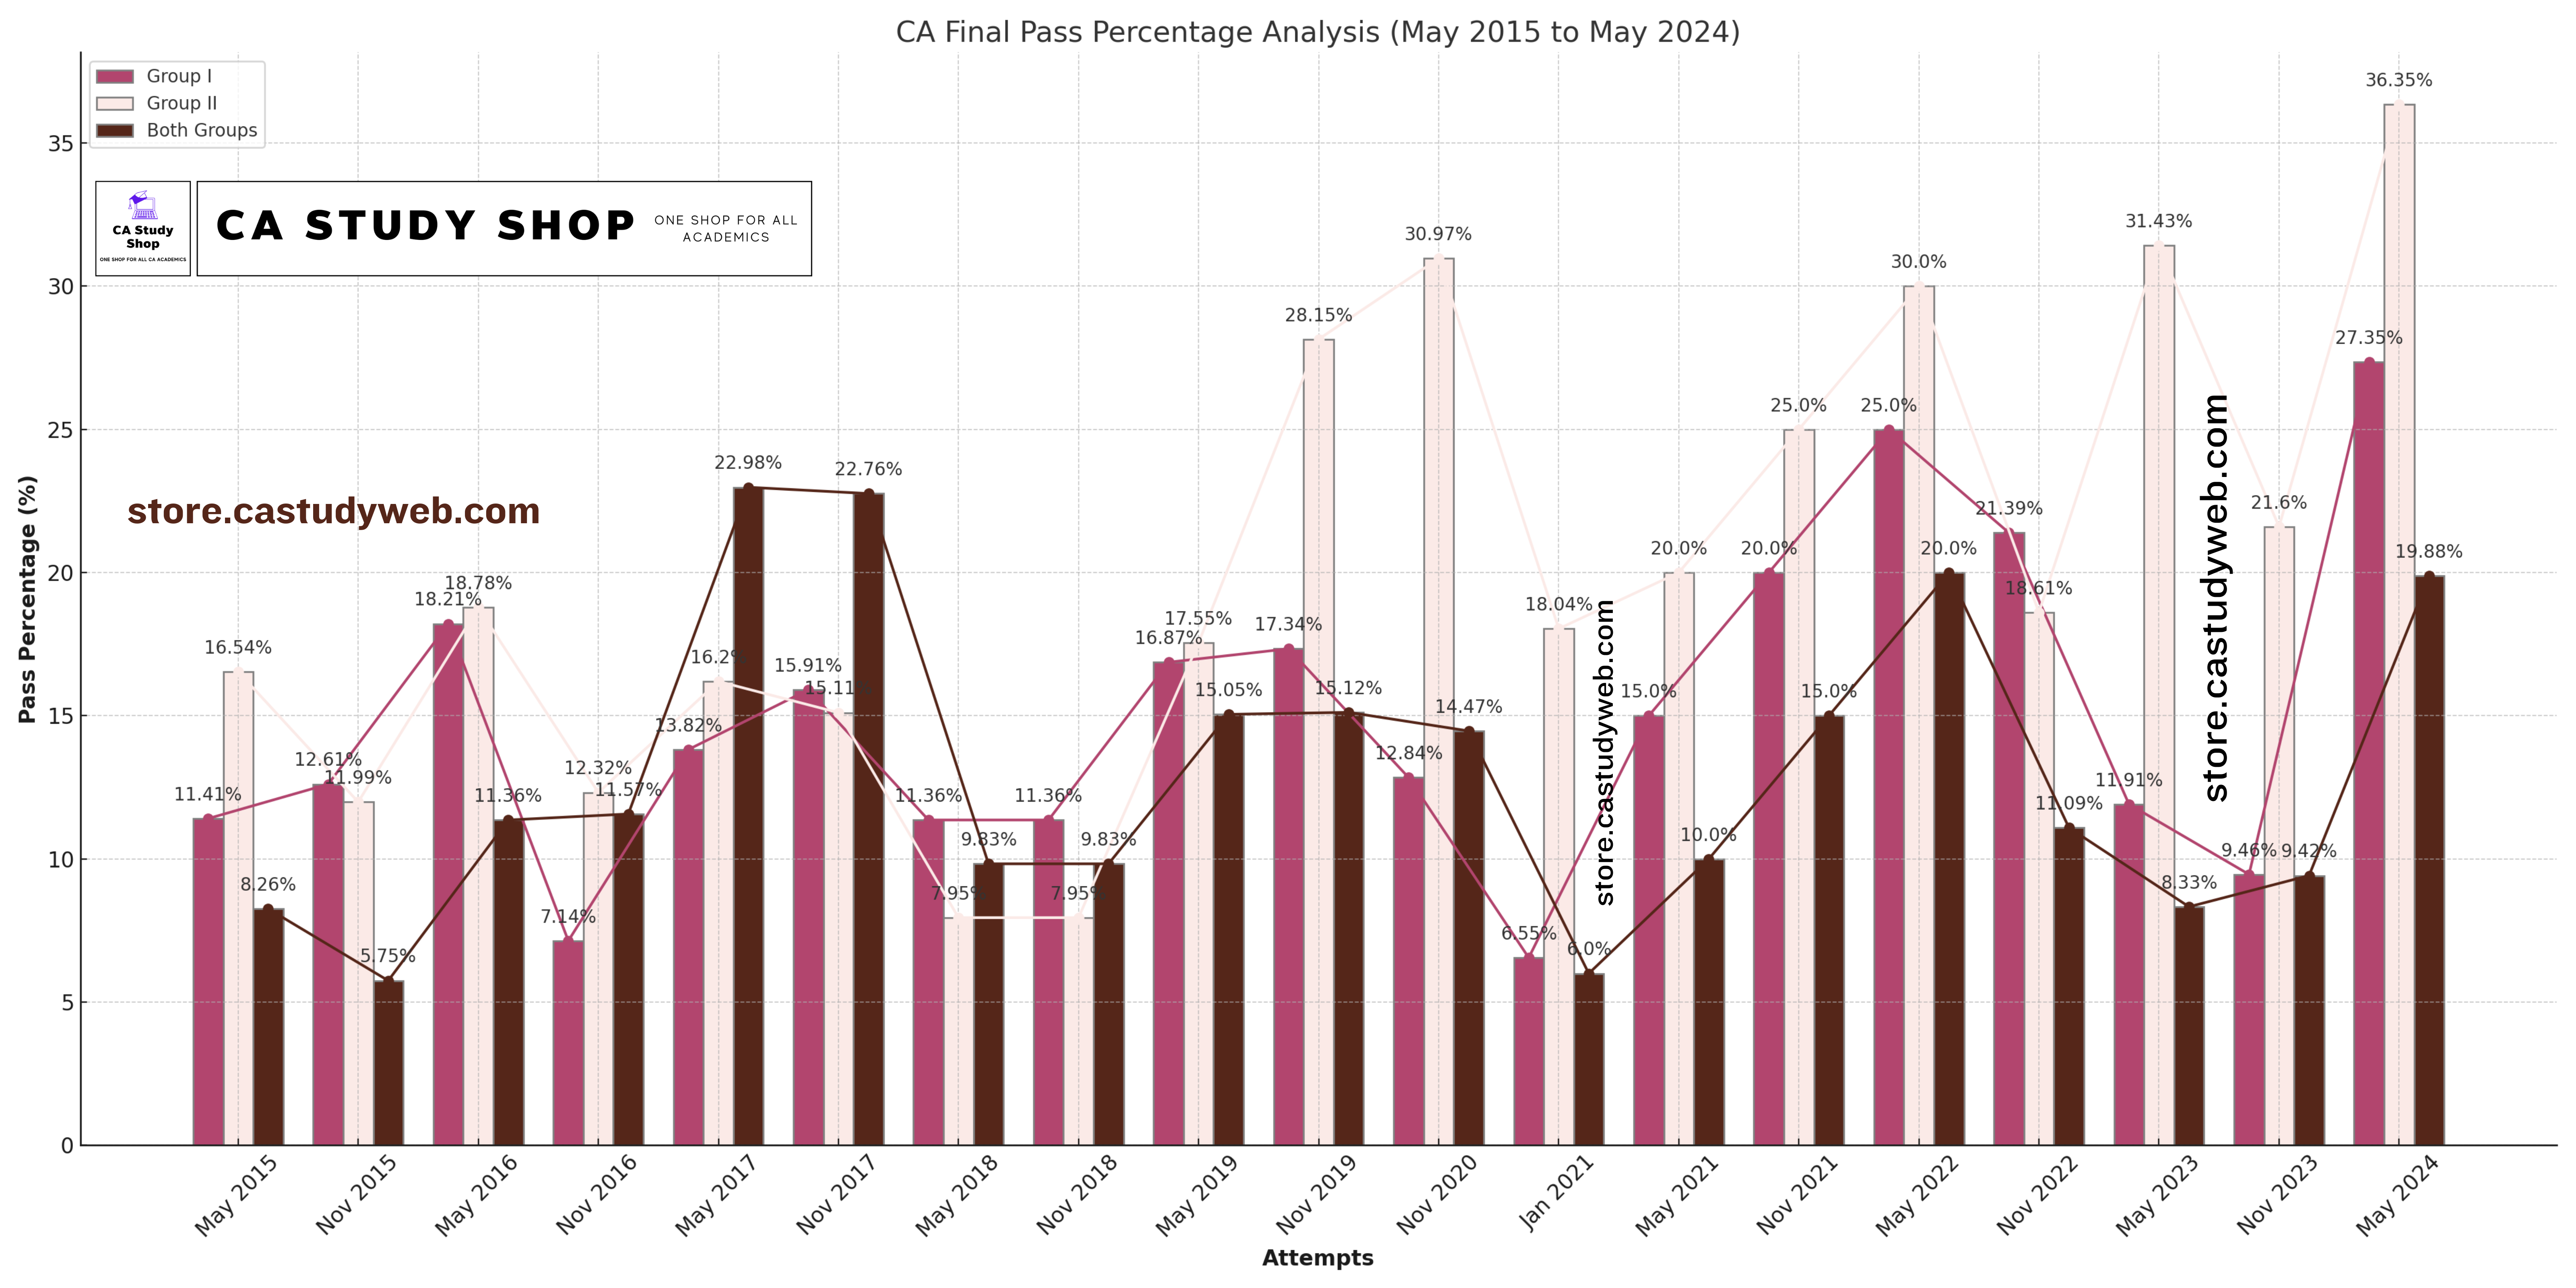 CA Final Pass Percentage Analysis (May 2015 to May 2024) - A detailed bar and line chart showing the pass percentages for Group I, Group II, and Both Groups across various CA Final exam attempts. The image highlights trends in passing rates over the years, with significant fluctuations and improvements, especially in recent attempts.